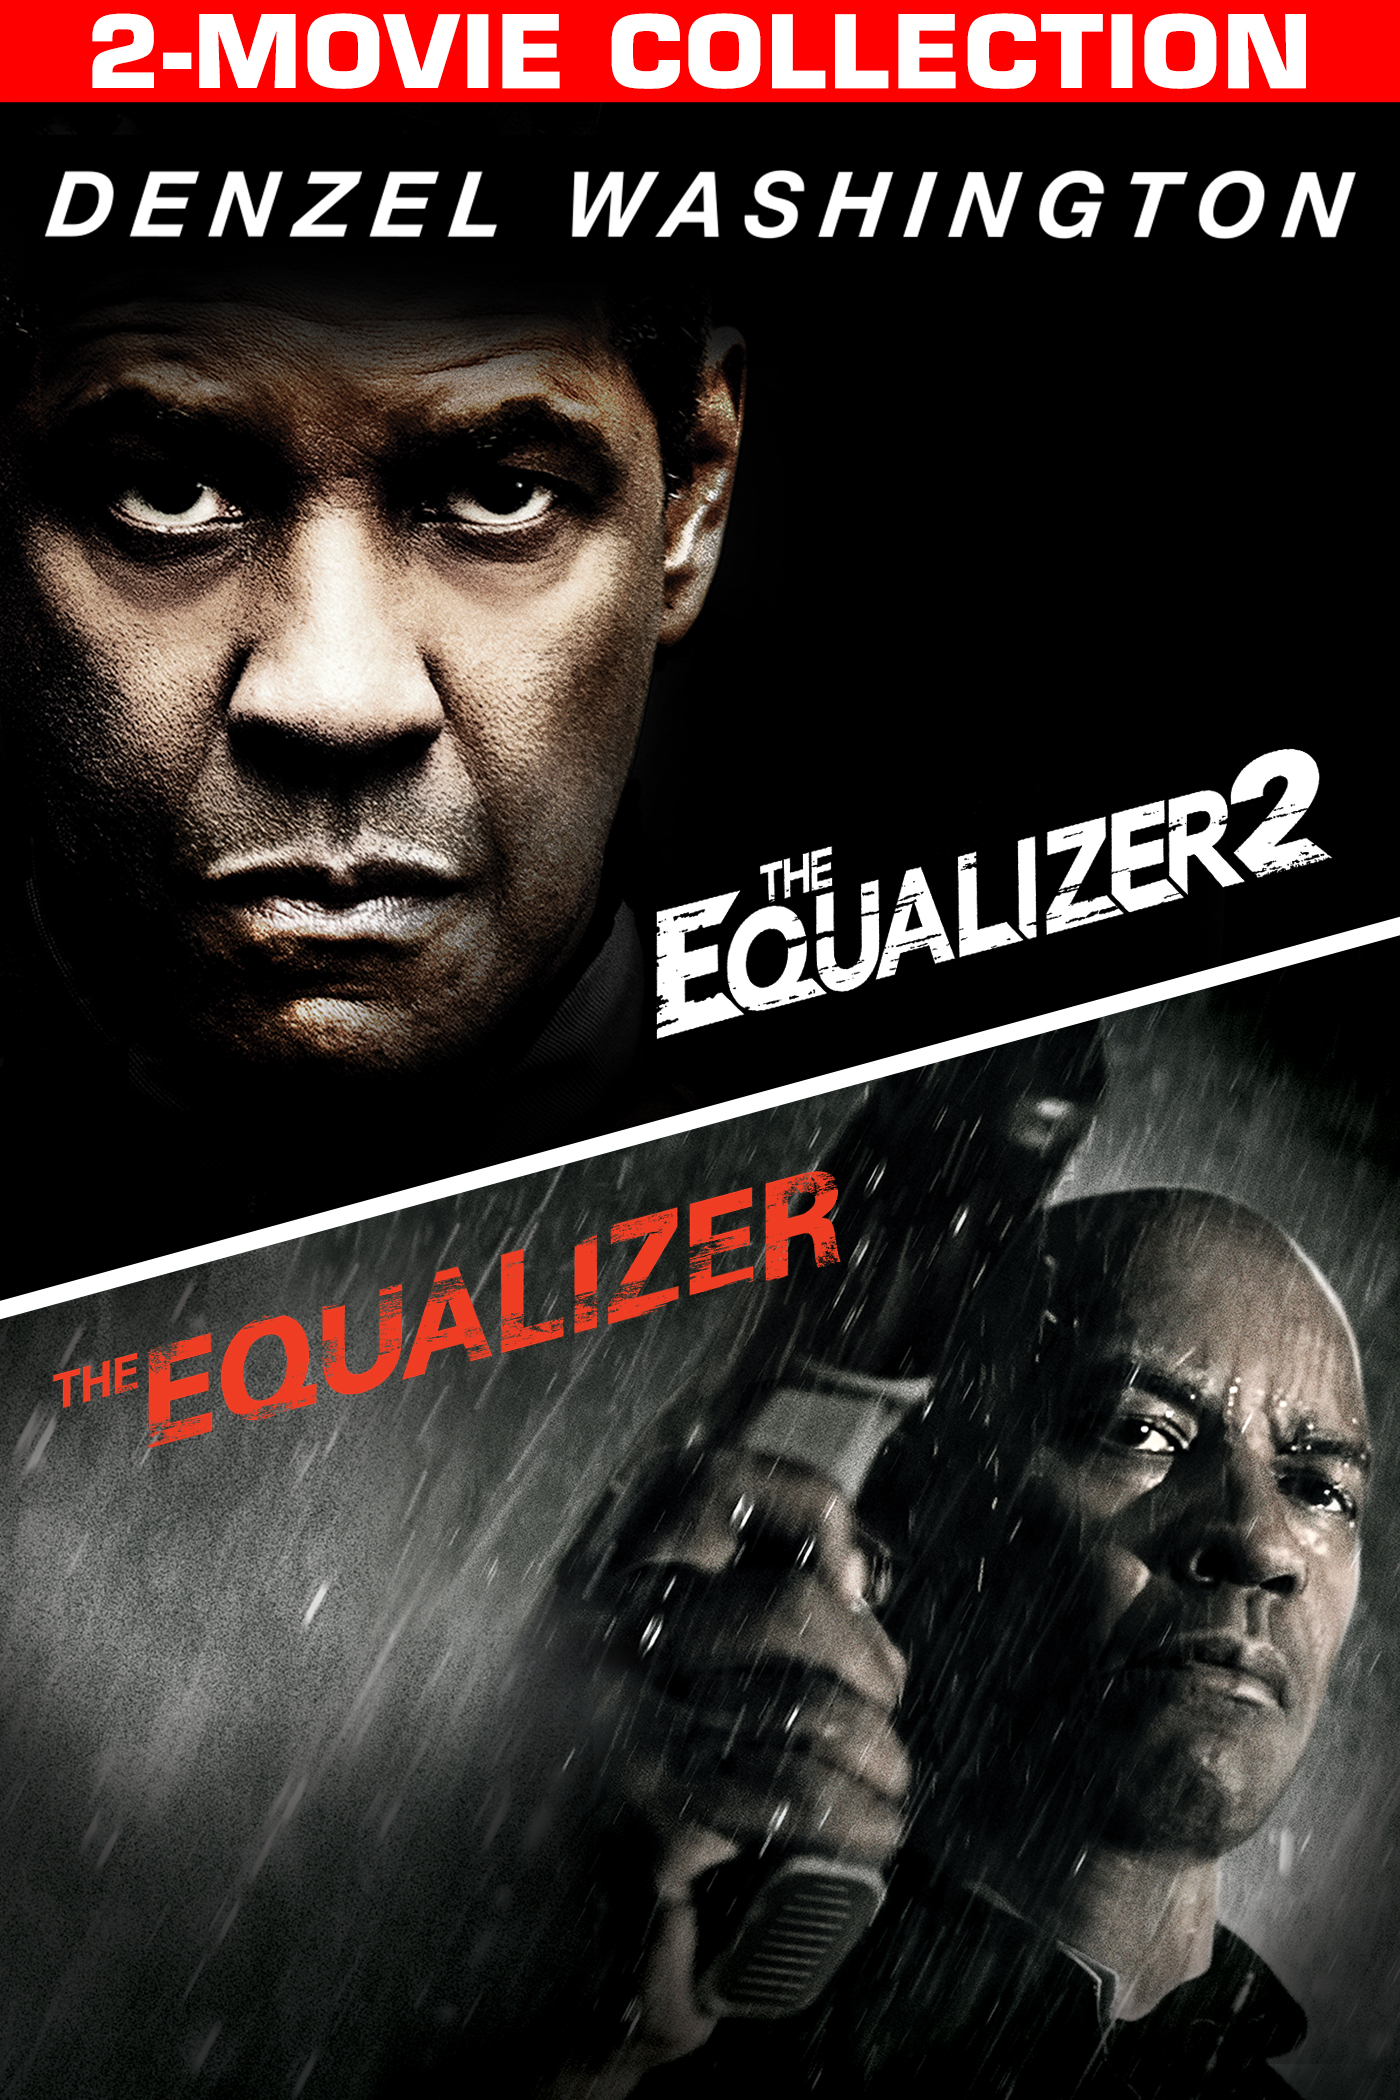 the equalizer 2 full movie online free